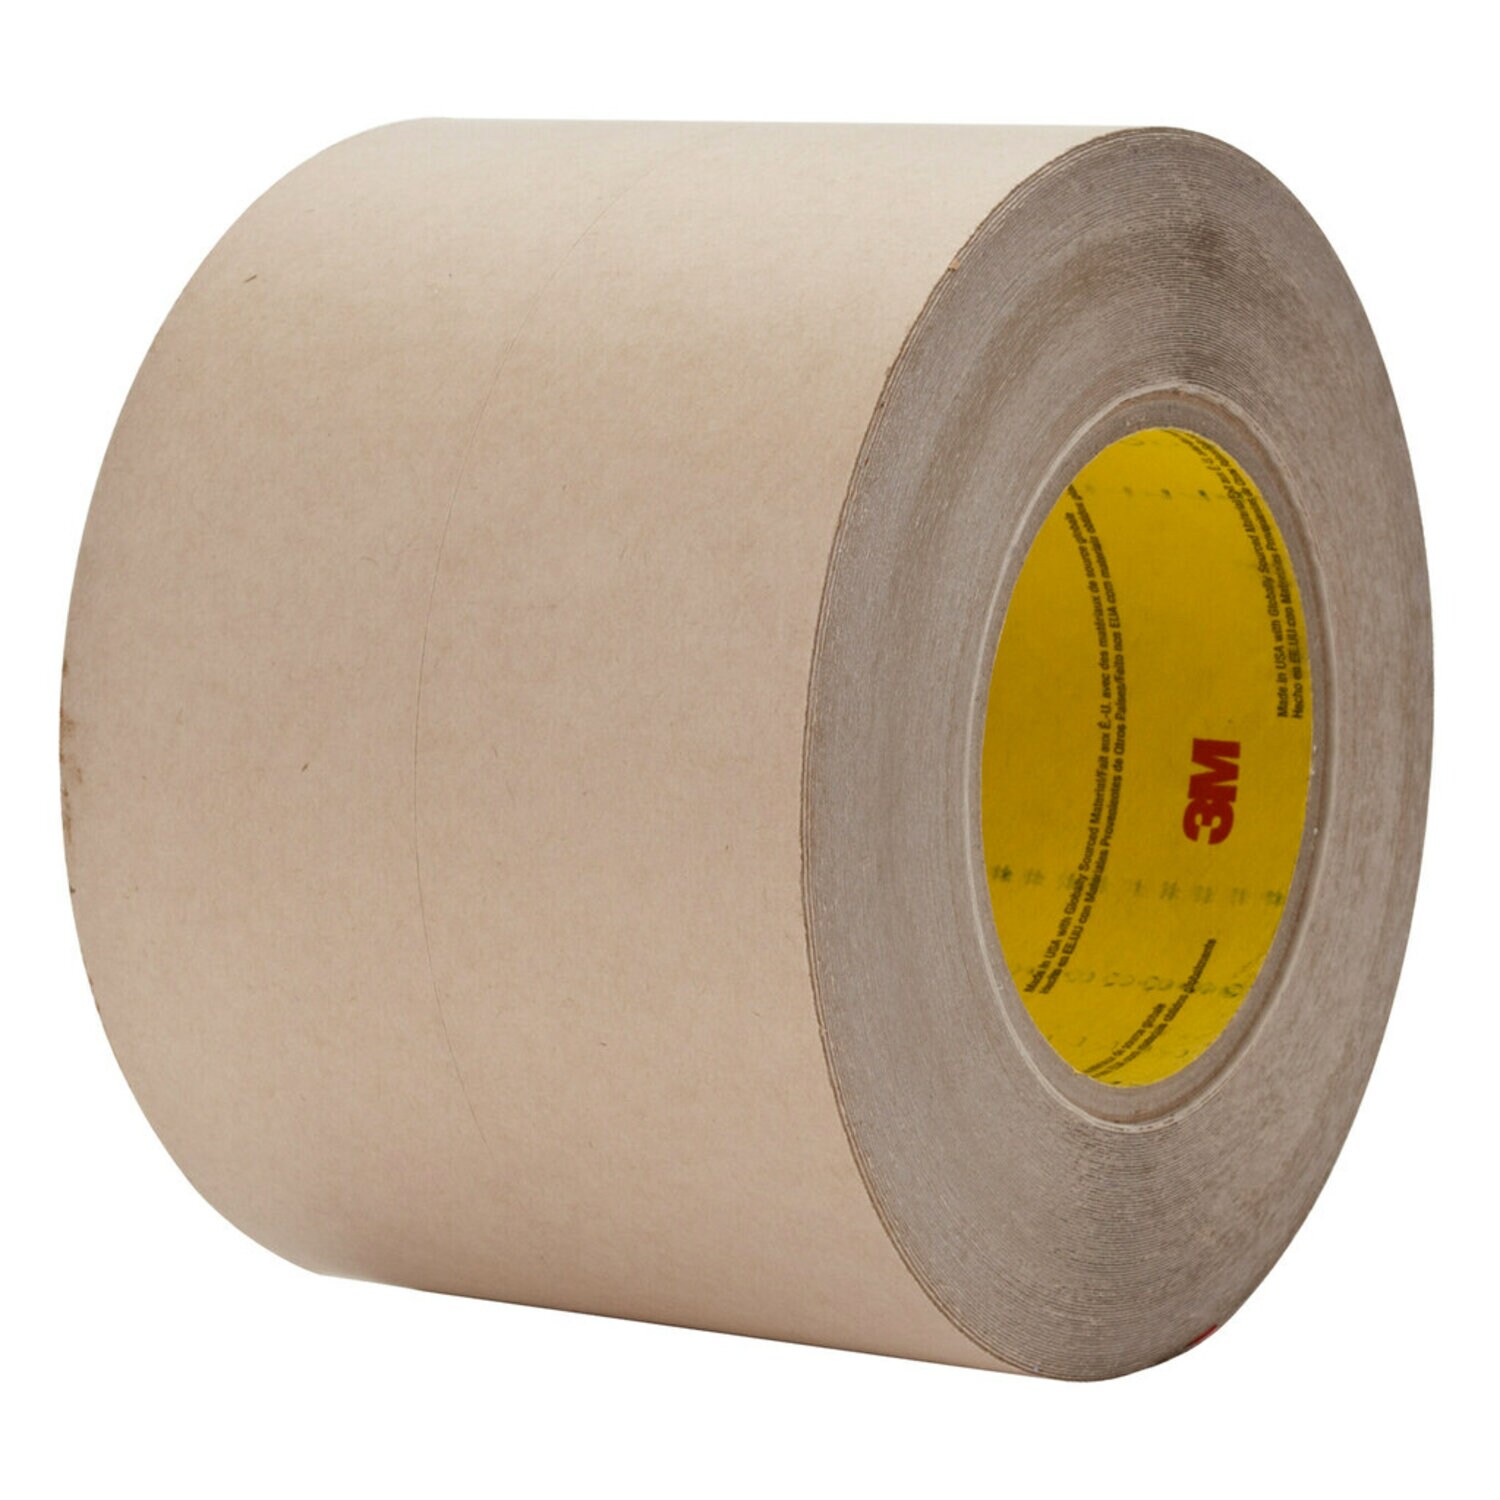 7010415511 - 3M Sealing Tape 8777 Tan, 60 in x 75 ft, 1 roll per case, Solid Liner